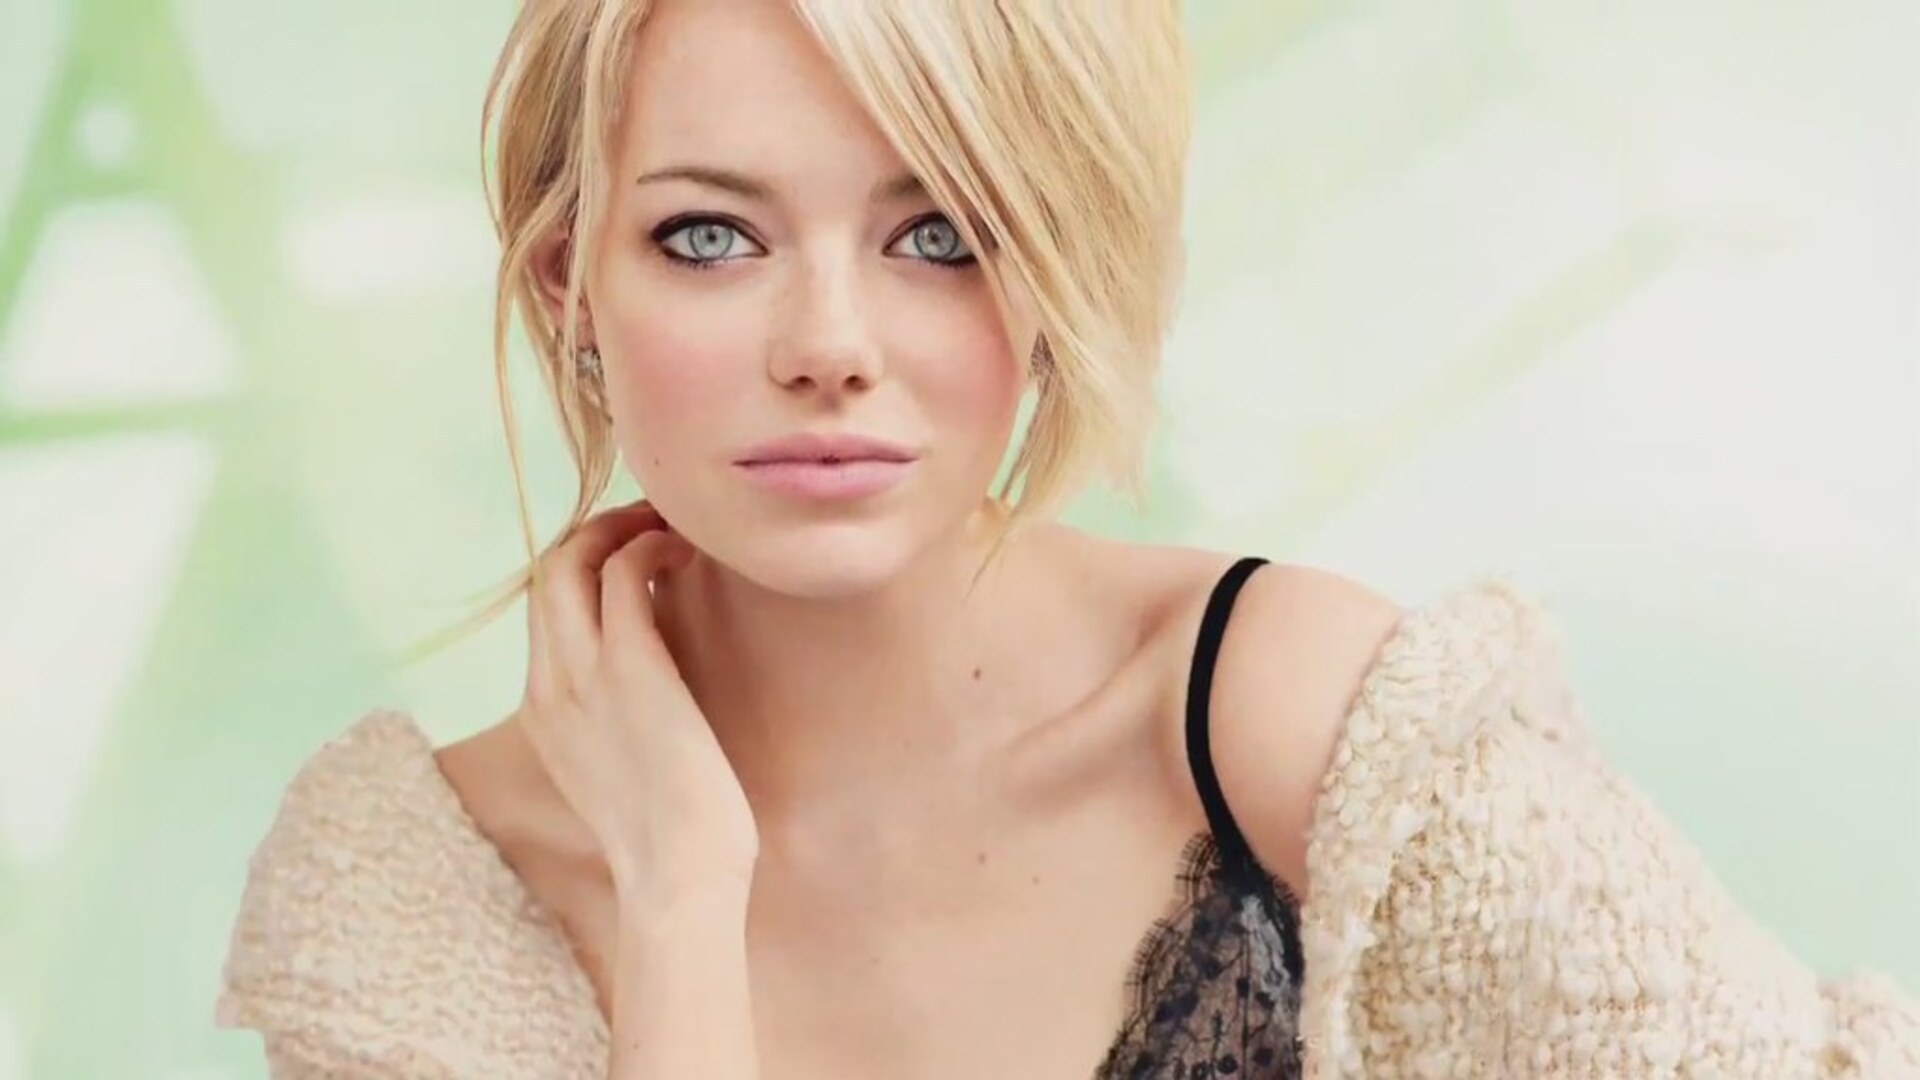 ‘Save the Green Planet’ remake to have Emma Stone?